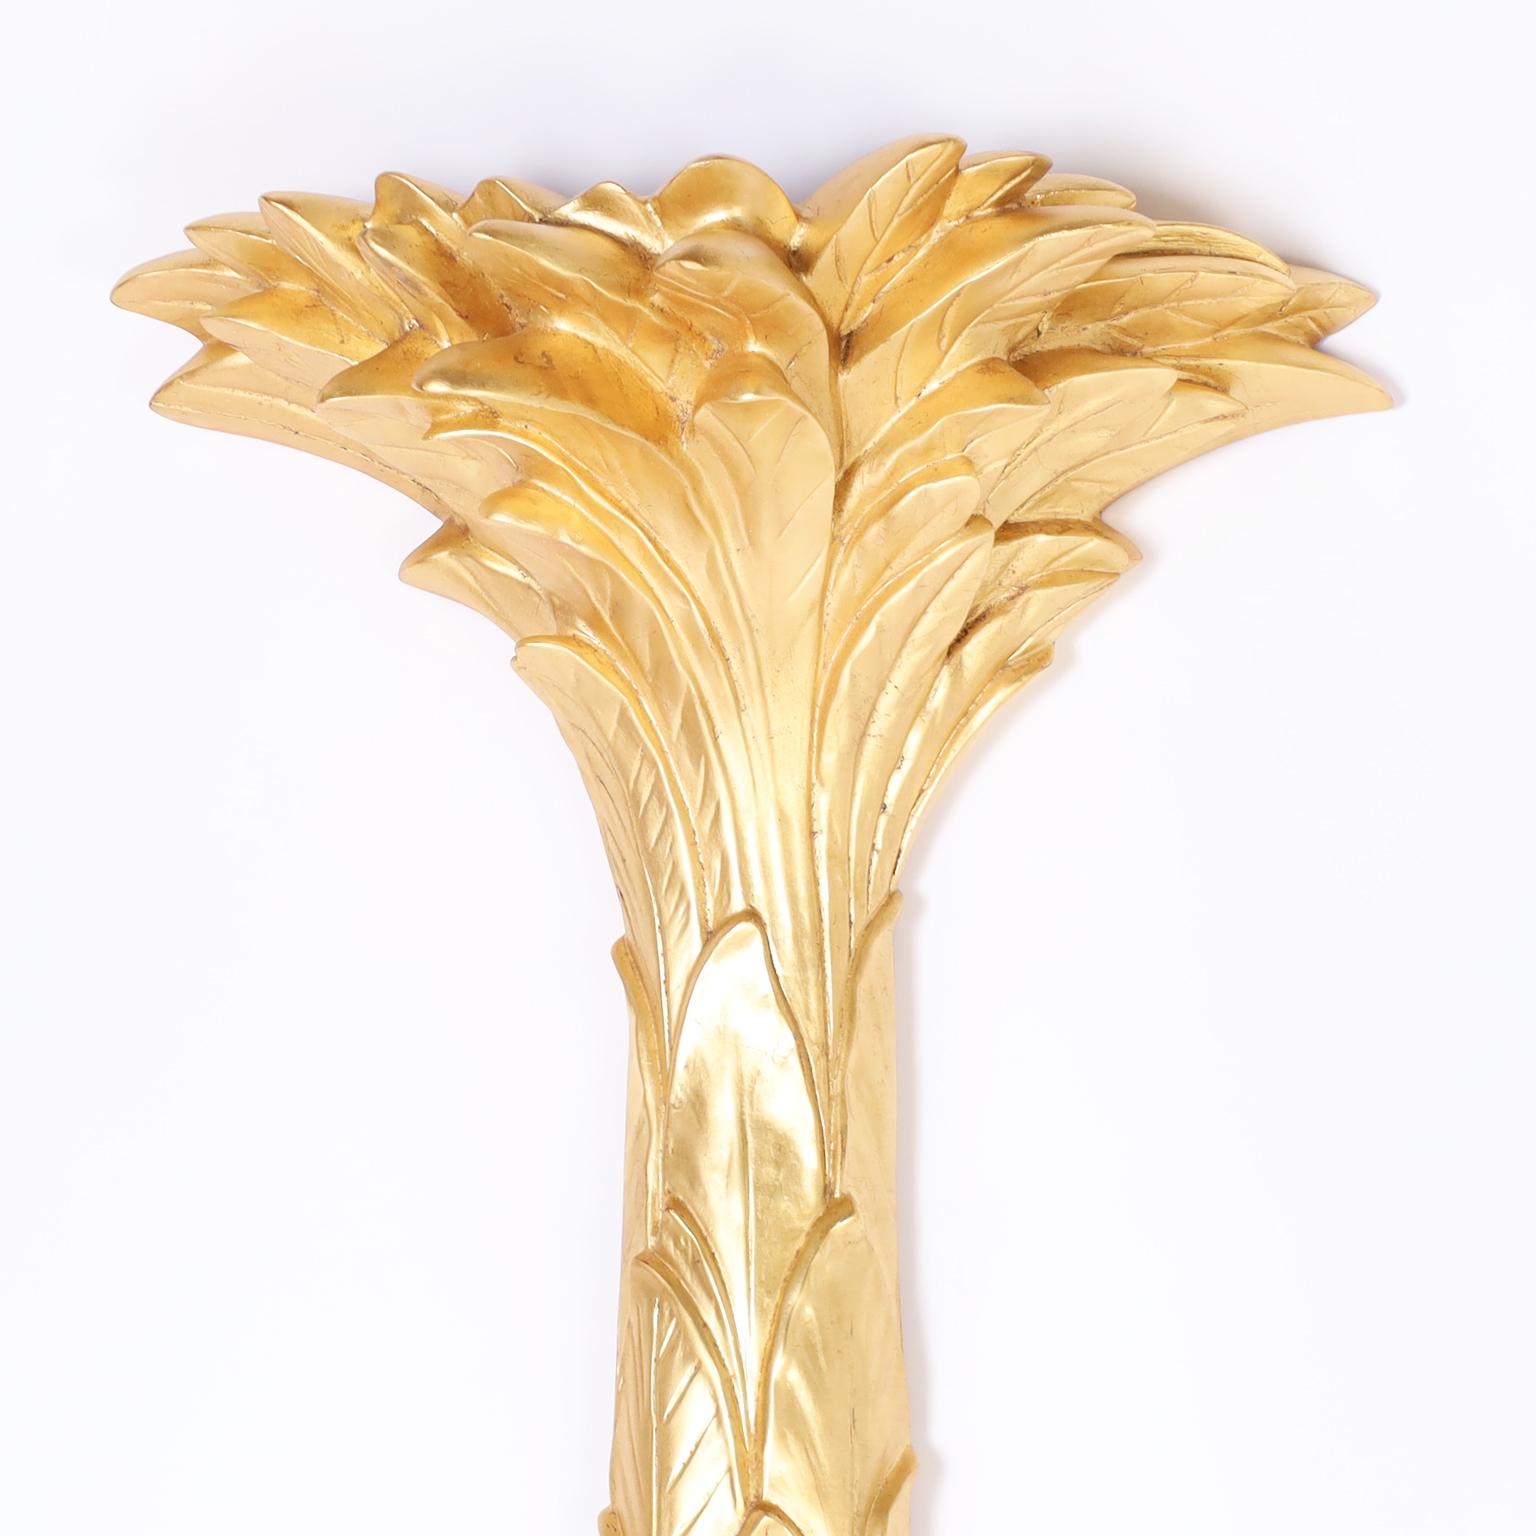 Mid-century Serge Roche style wall mounted palm tree torchiere crafted in cast composition and featuring an alluring lush gilded finish.